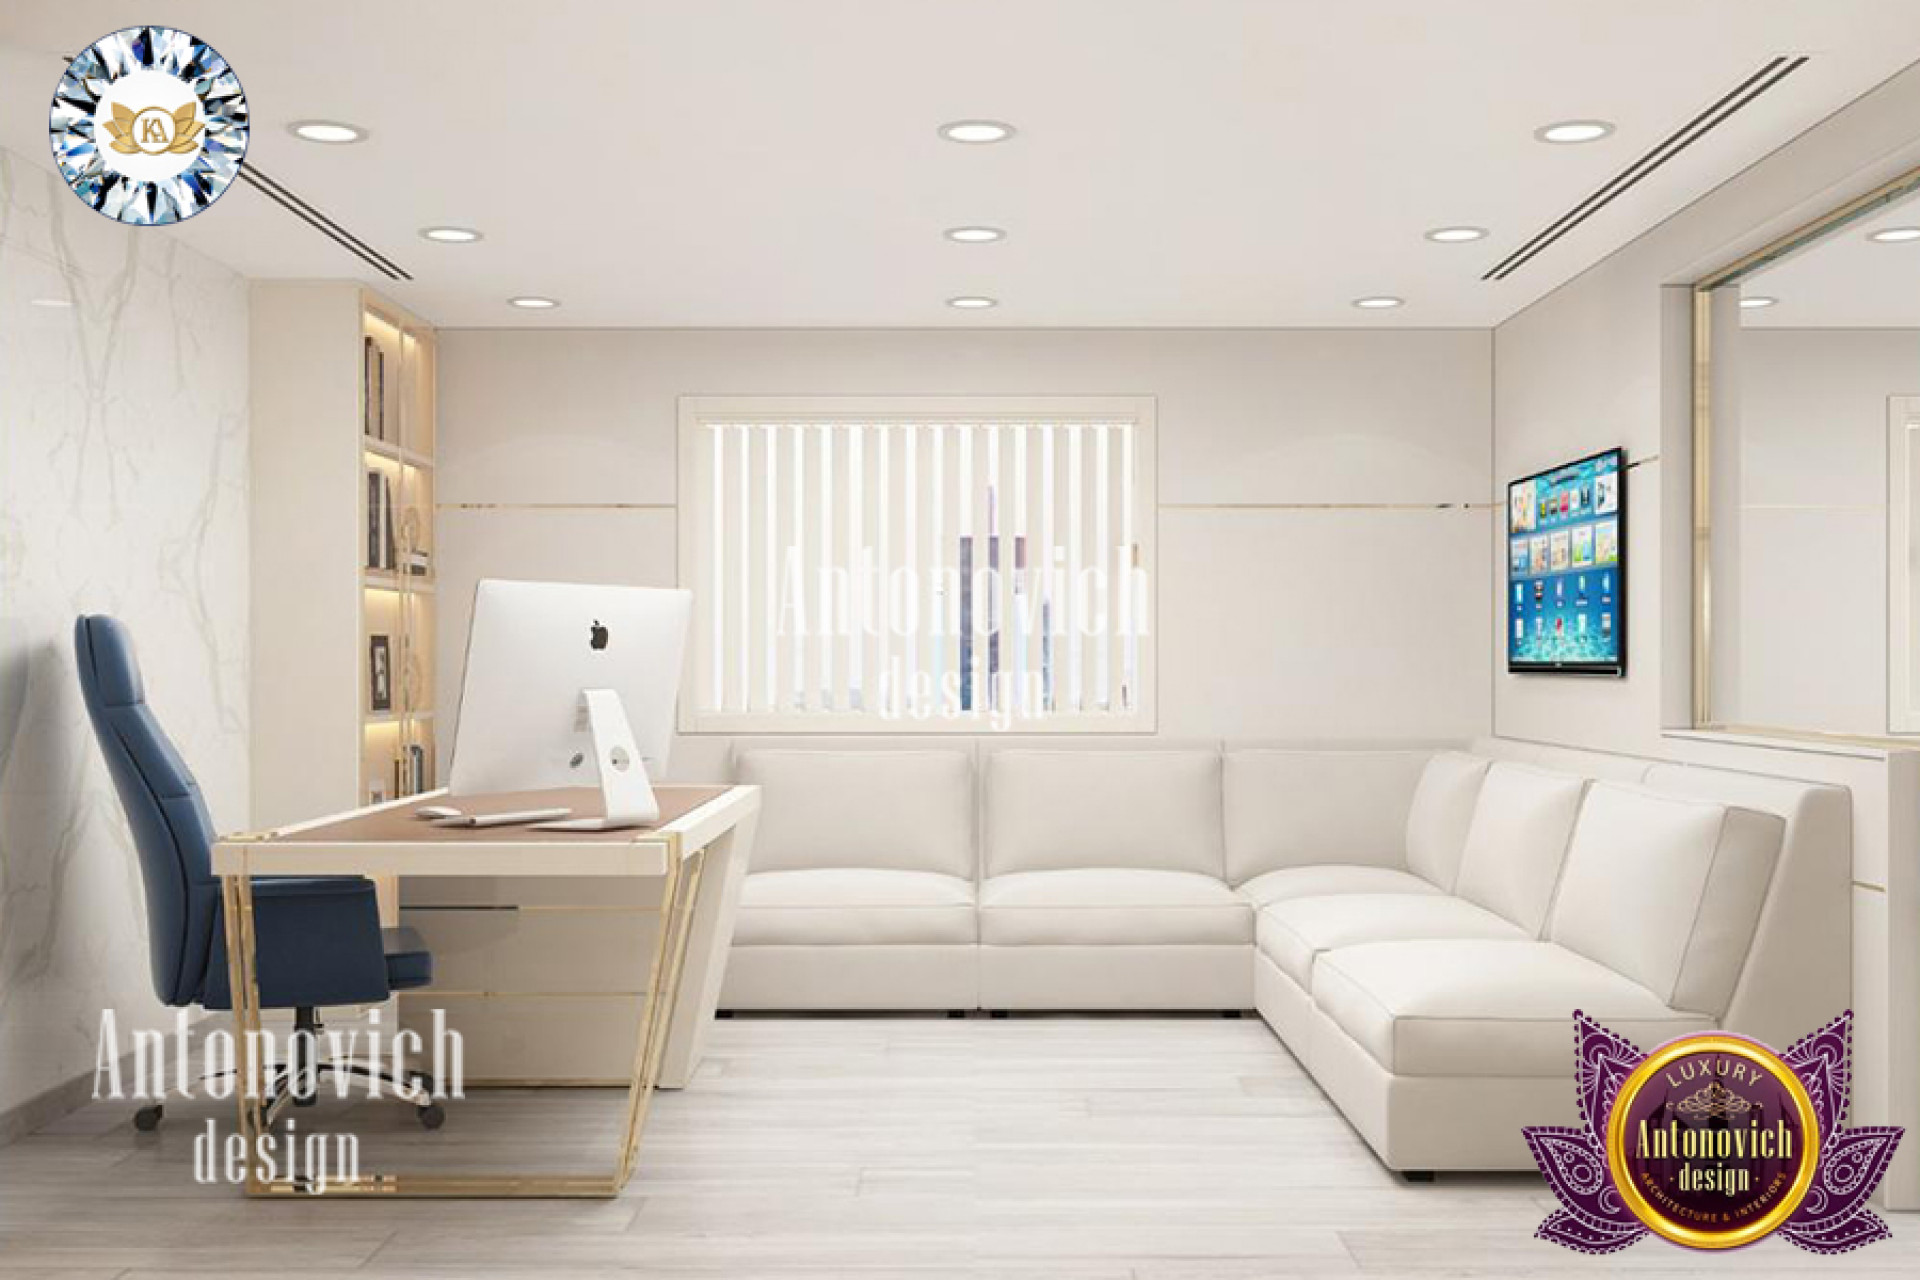 OFFICE FIT-OUT INTERIOR DESIGN BY LUXURY ANTONOVICH DESIGN 